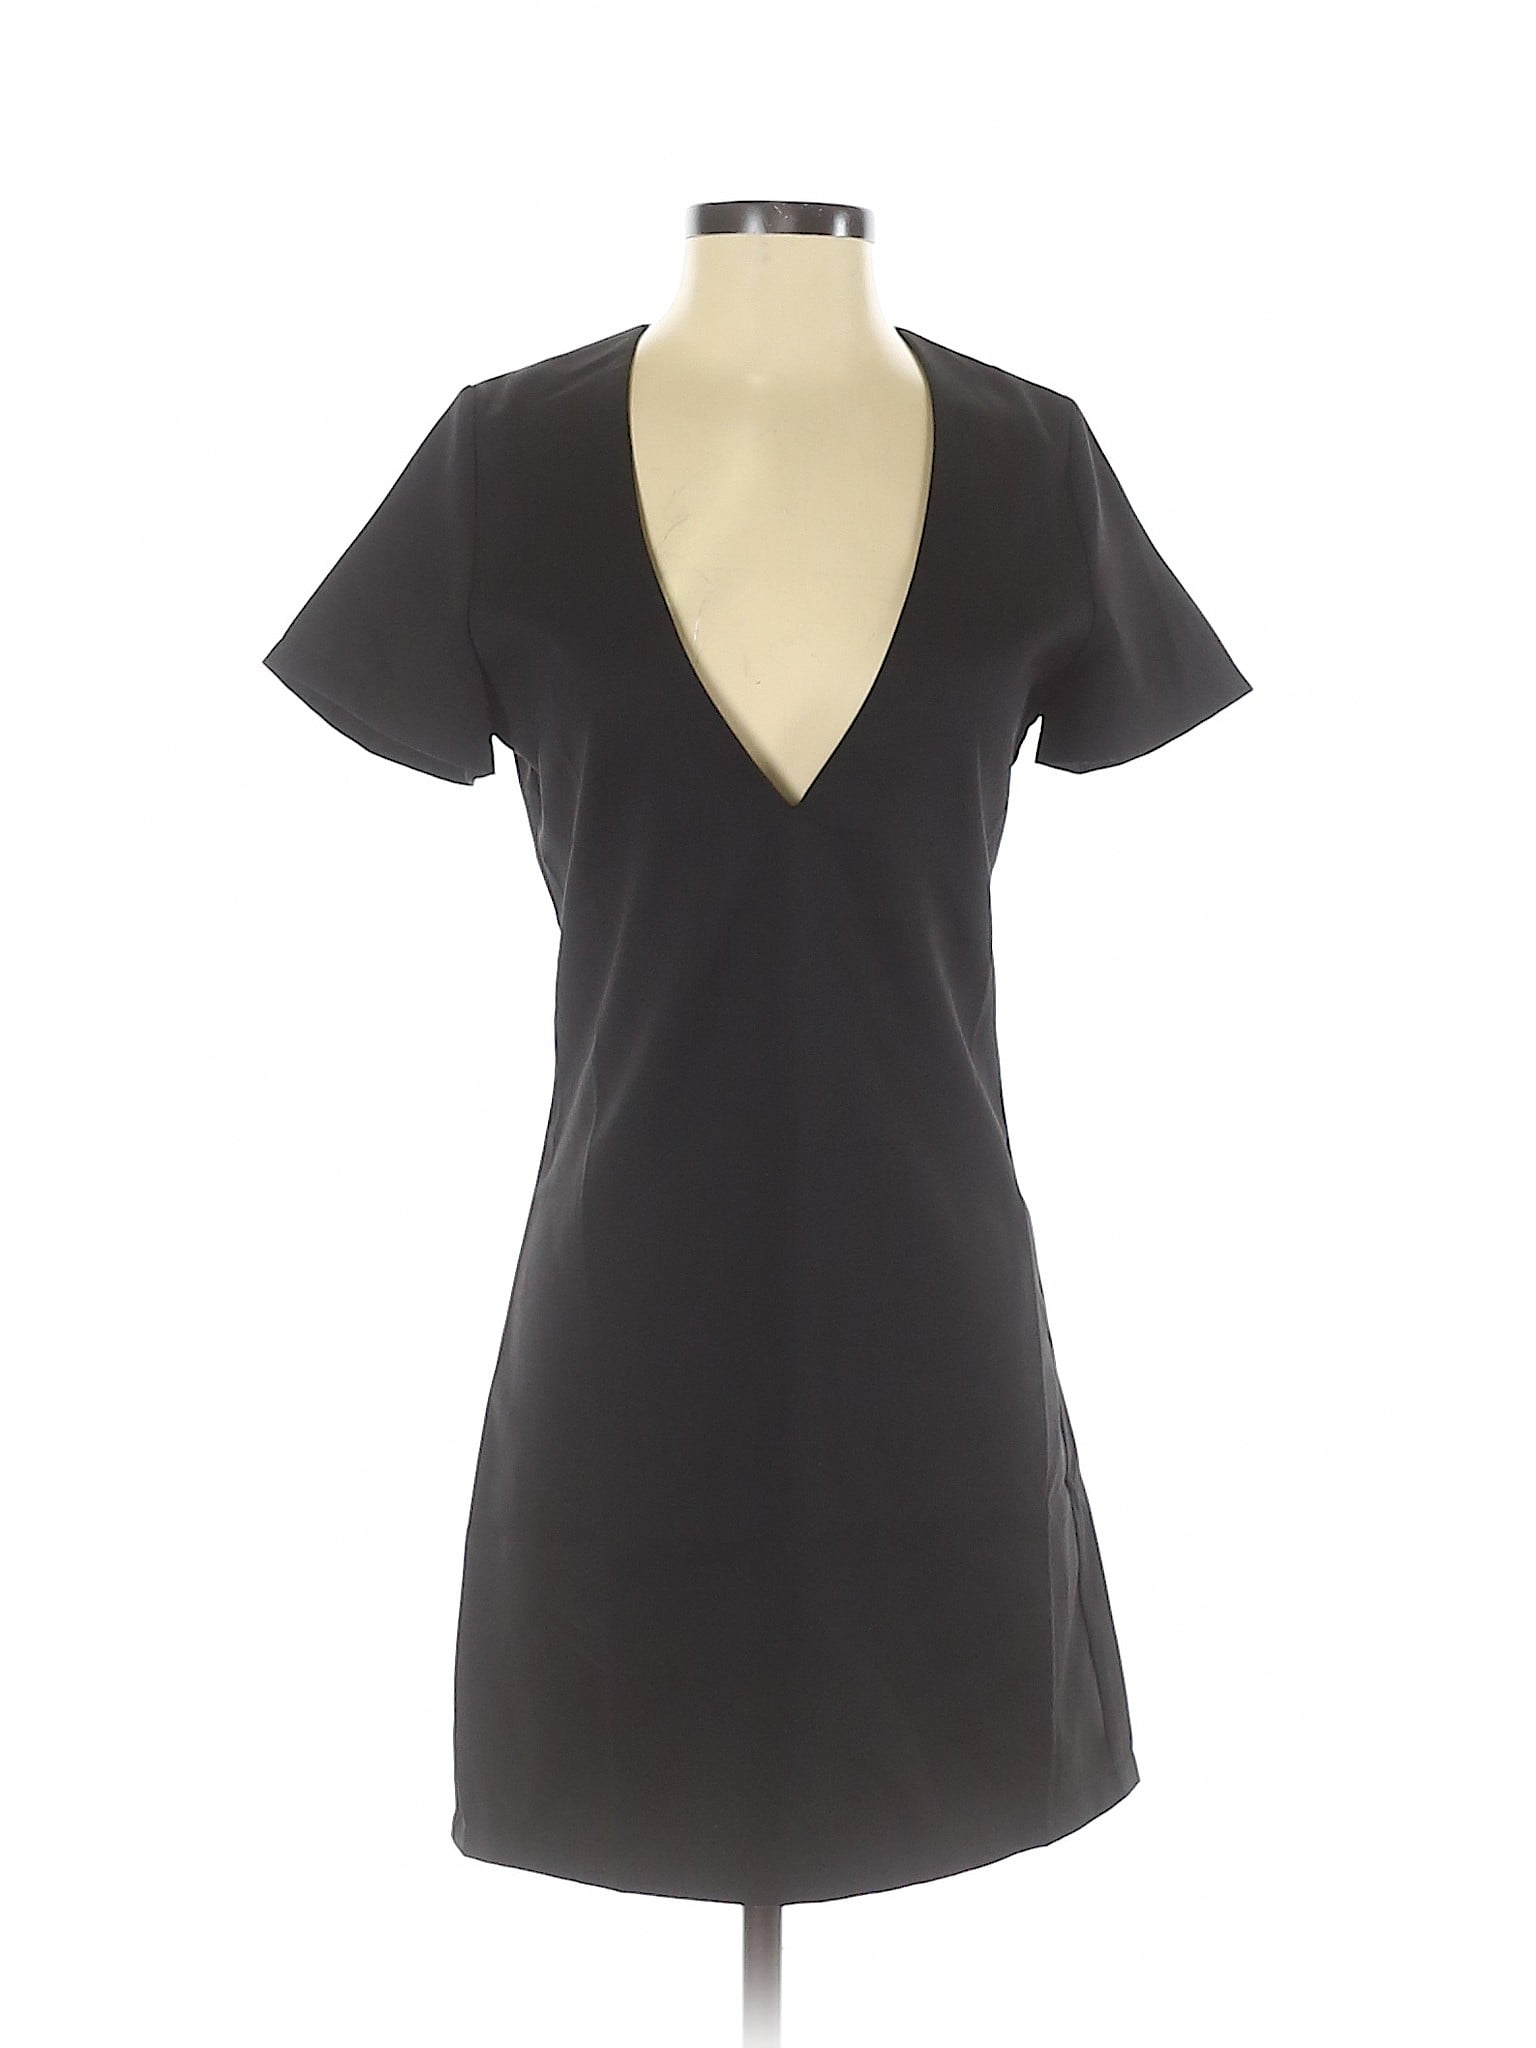 petite size cover up dress